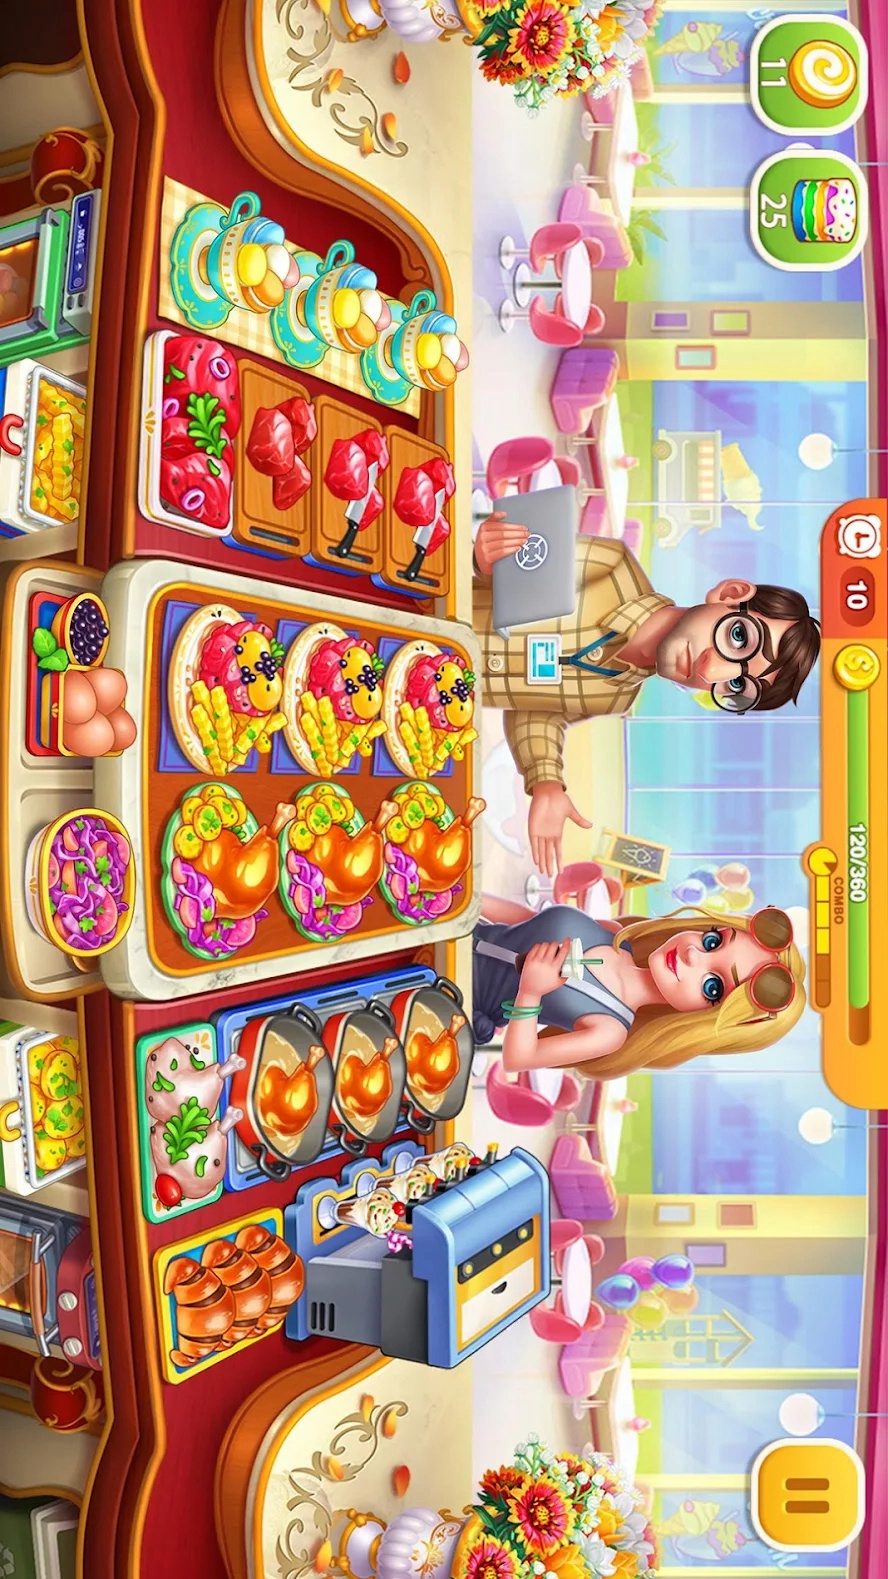 Crazy Kitchen: Cooking Game(Infinite gold)